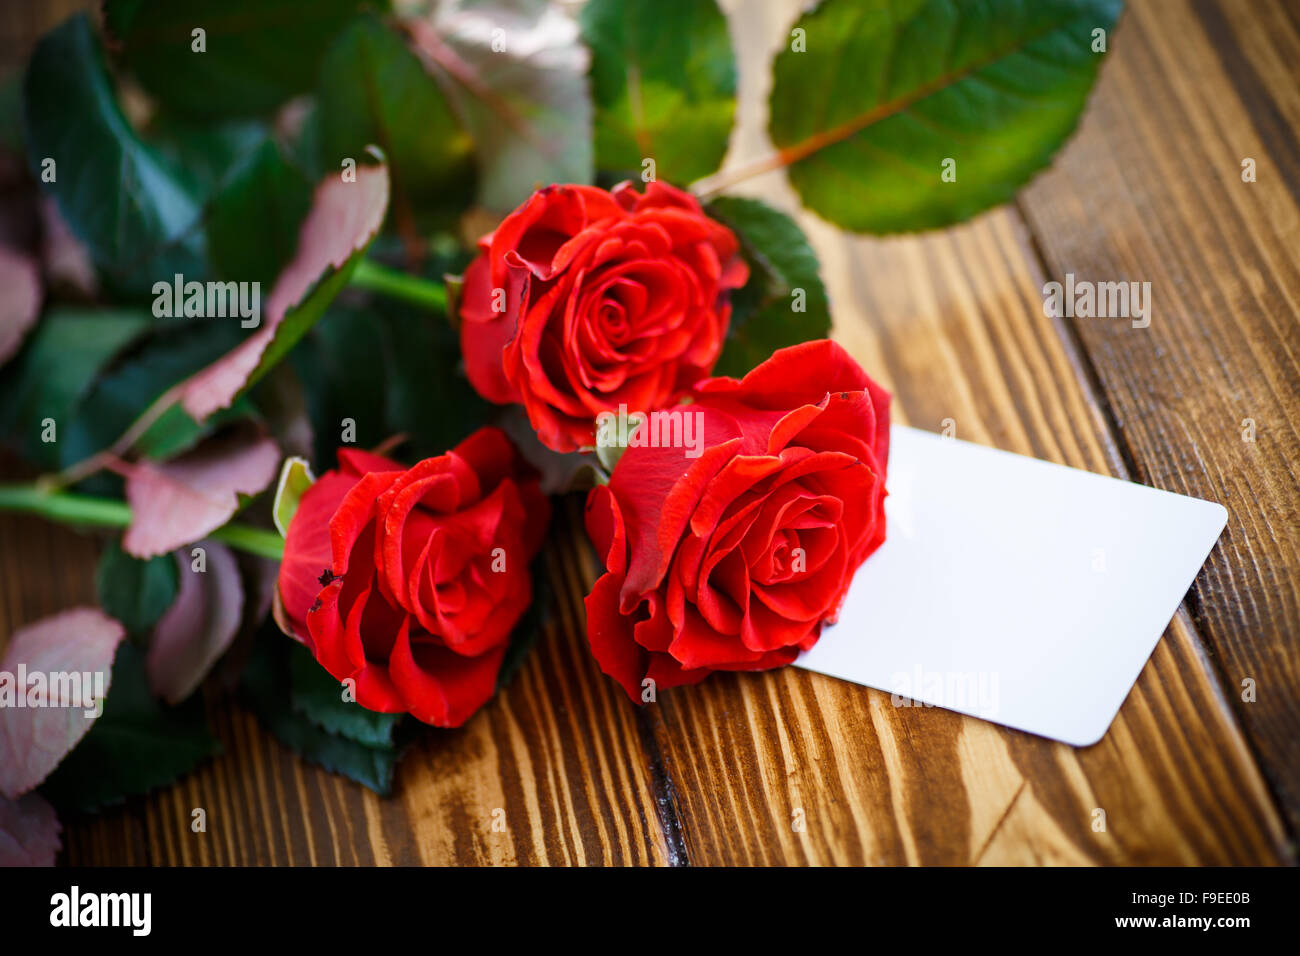 A stylish decoration of red rose flowers, ribbons on a shiny black